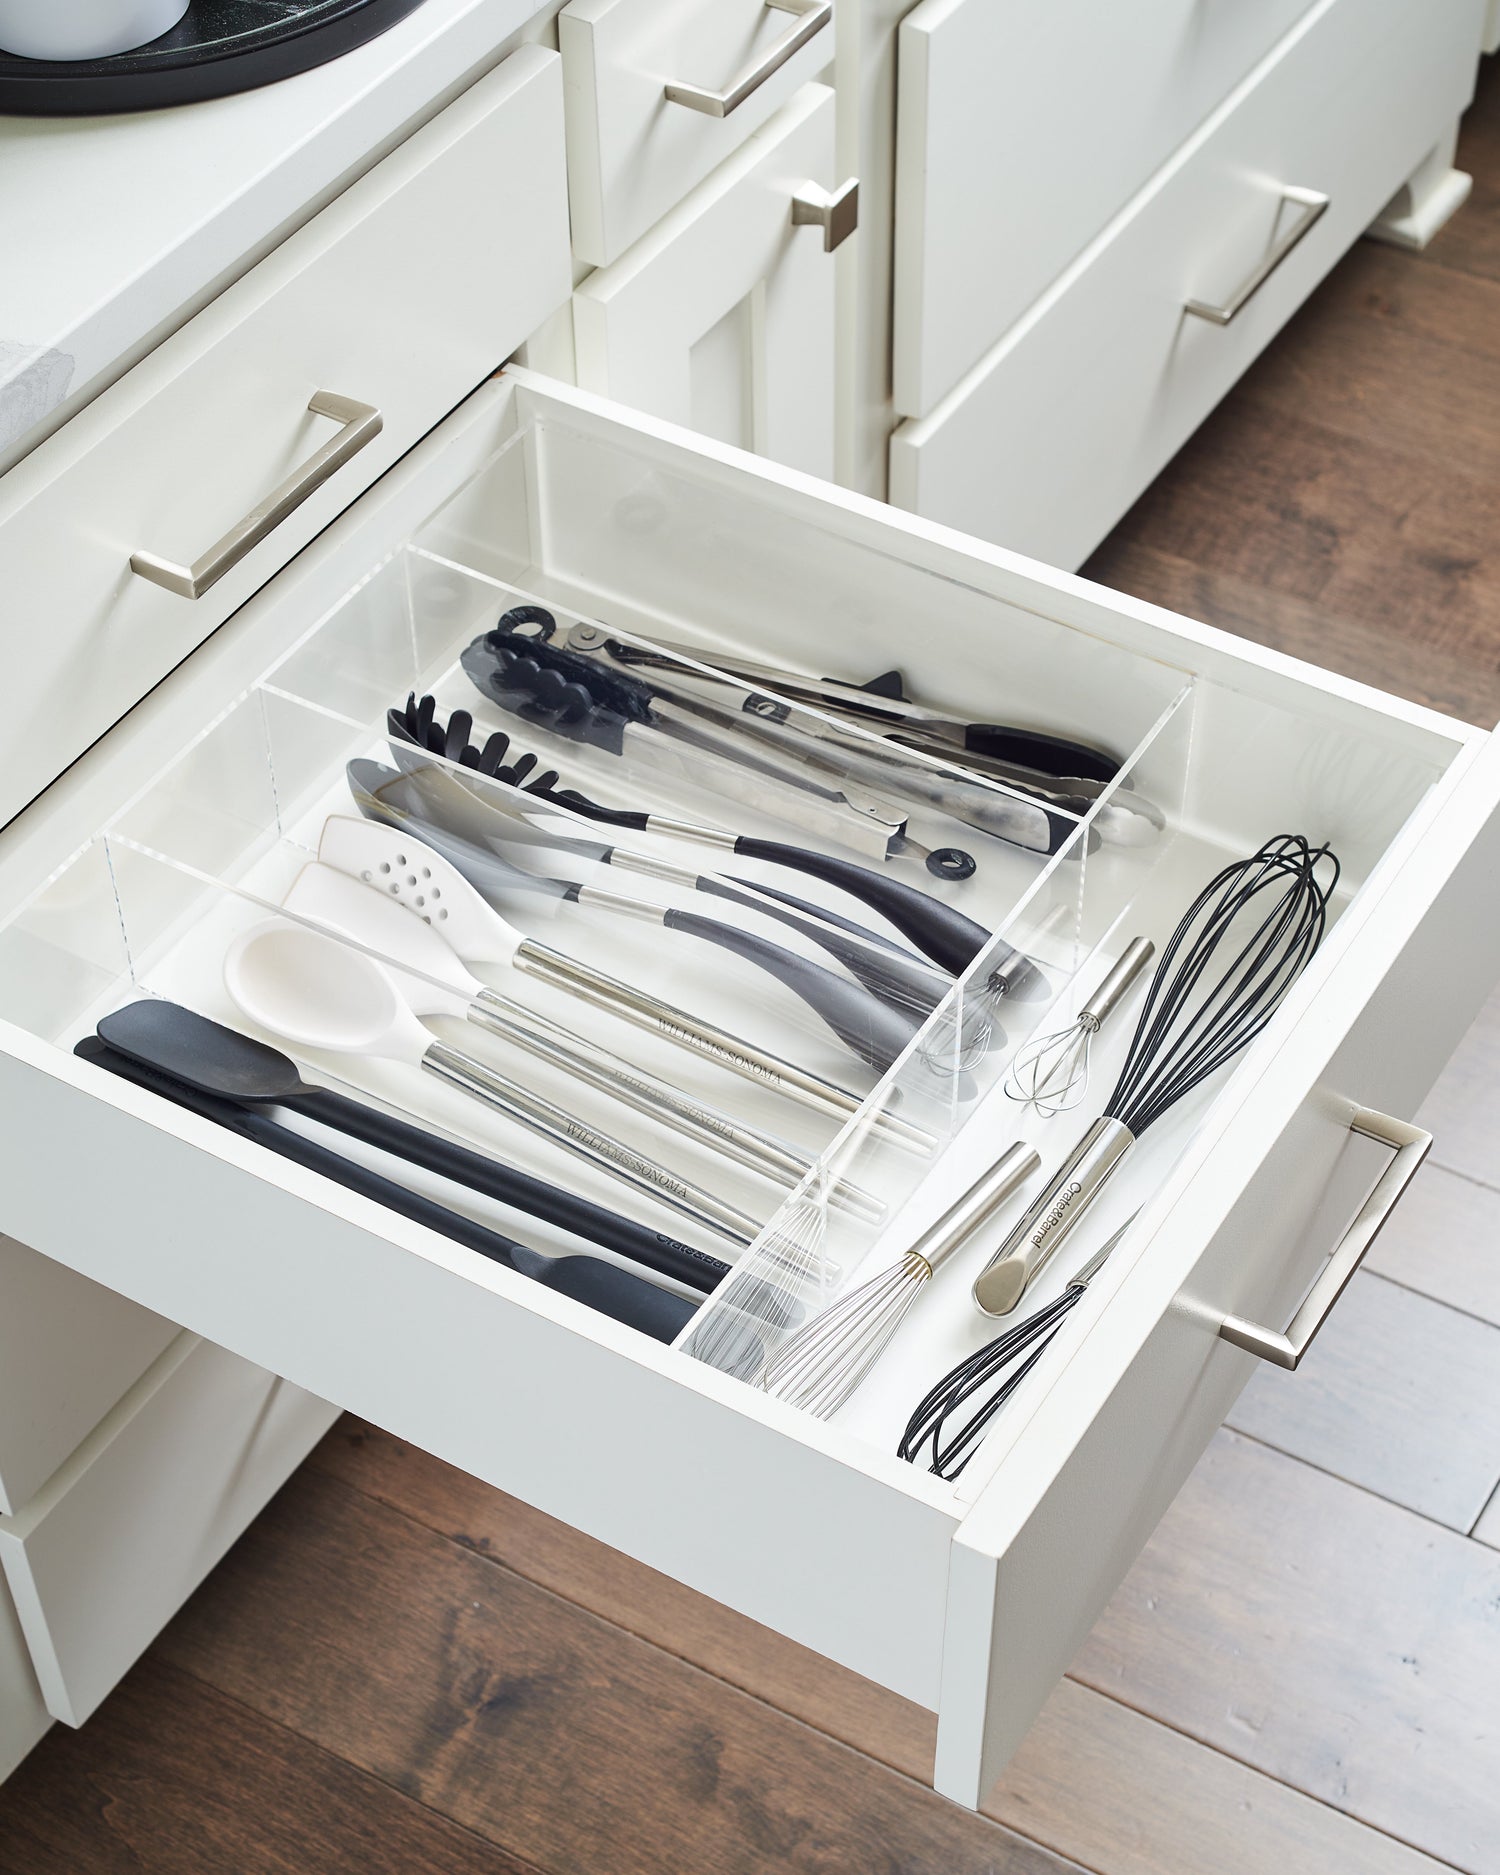 Side view of a kitchen utensil drawer perfectly put together with a custom-fit drawer organizer.  